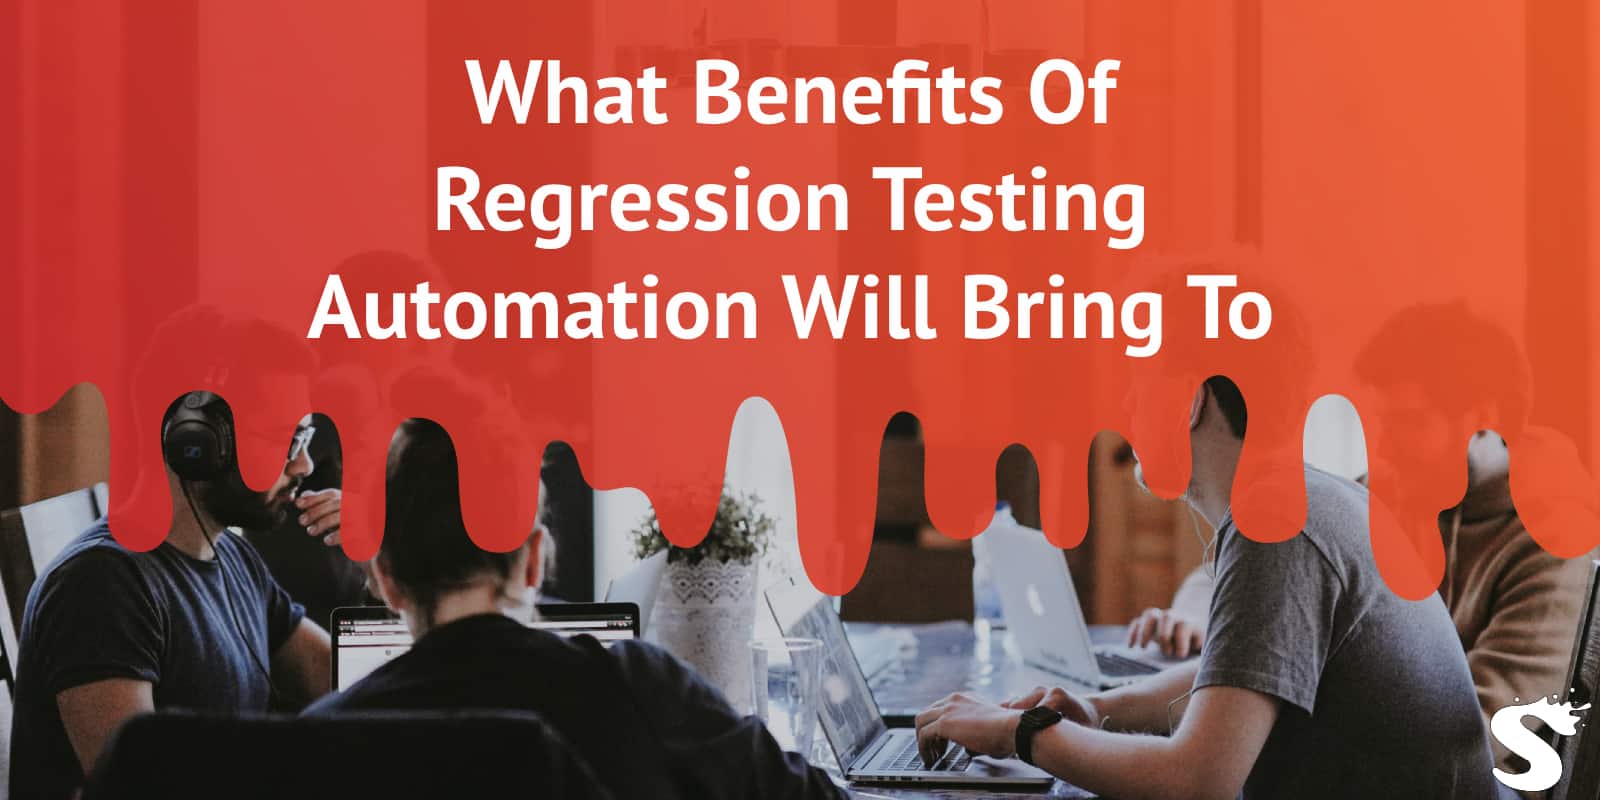 What Benefits Of Regression Testing Automation Will Bring To The Team?